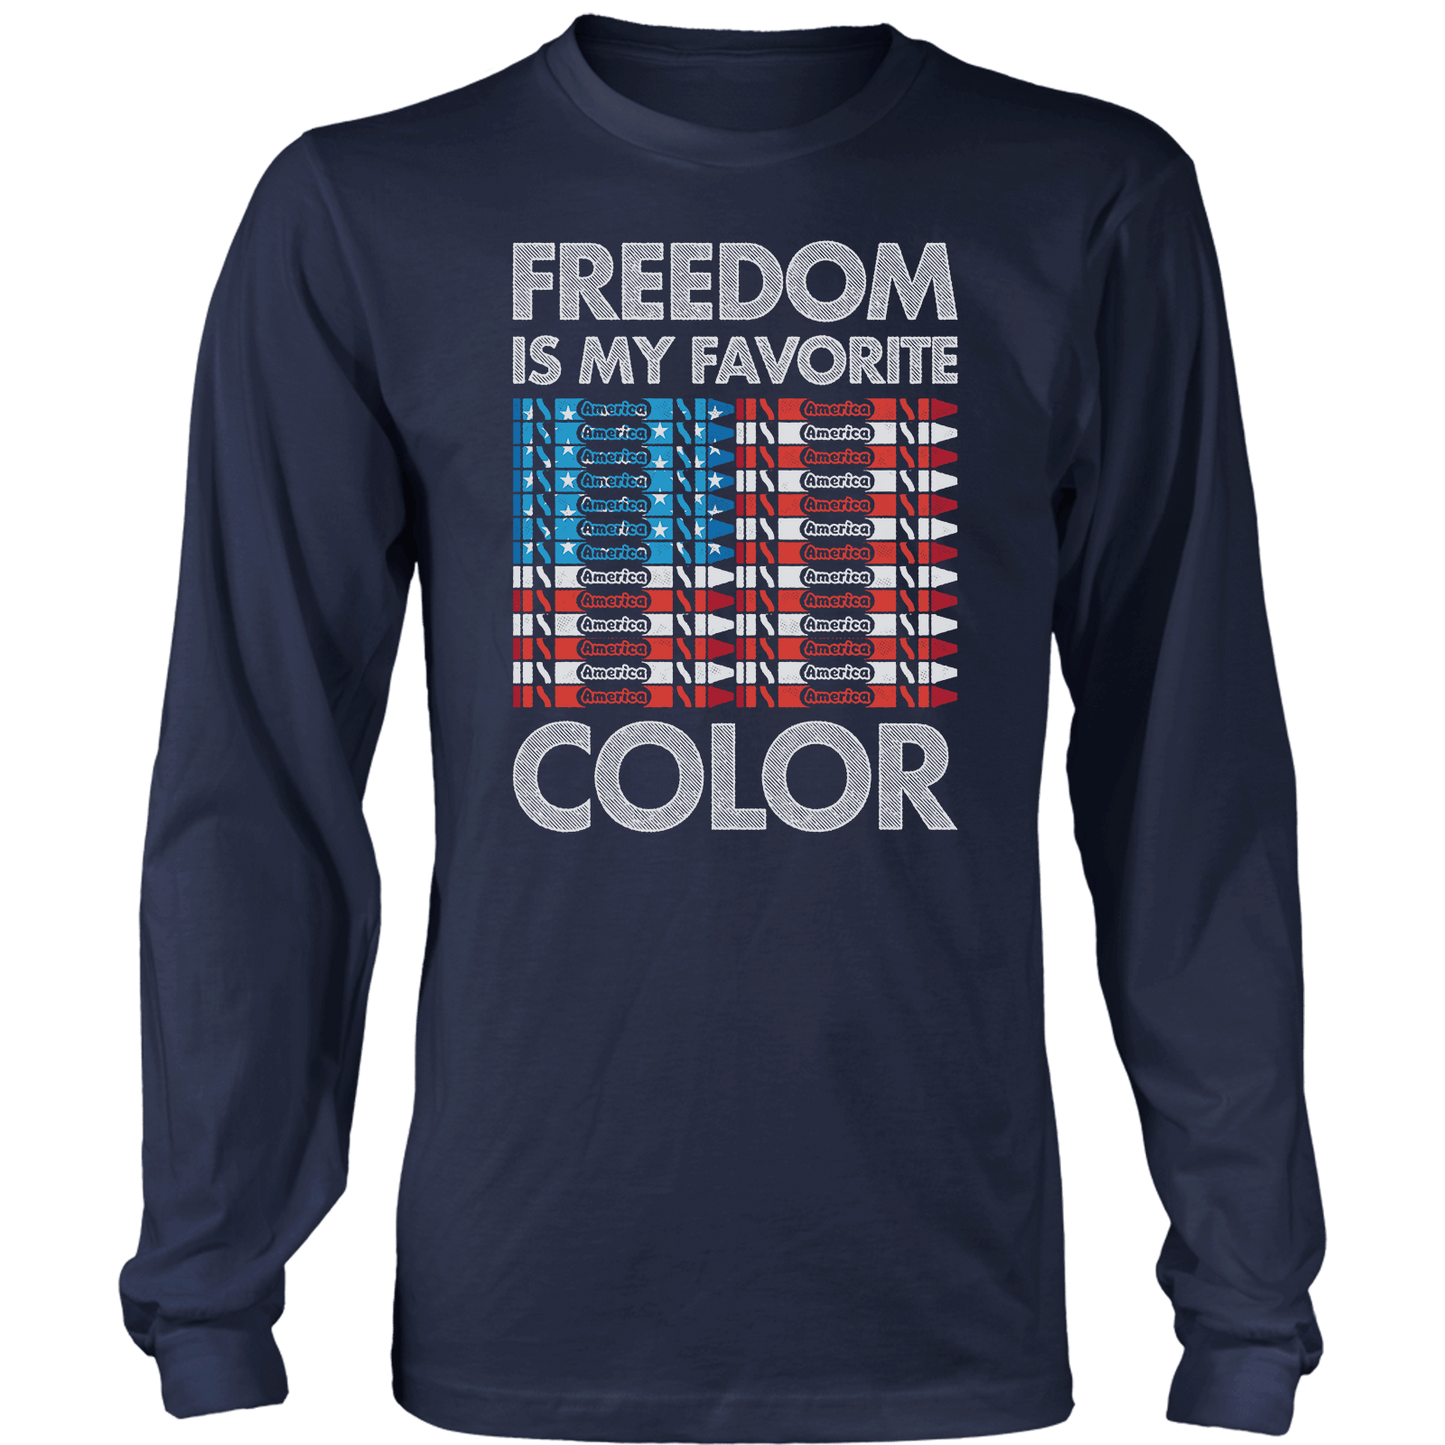 Apparel Mens Long Sleeve / Midnight Navy / S Freedom is my Favorite Color